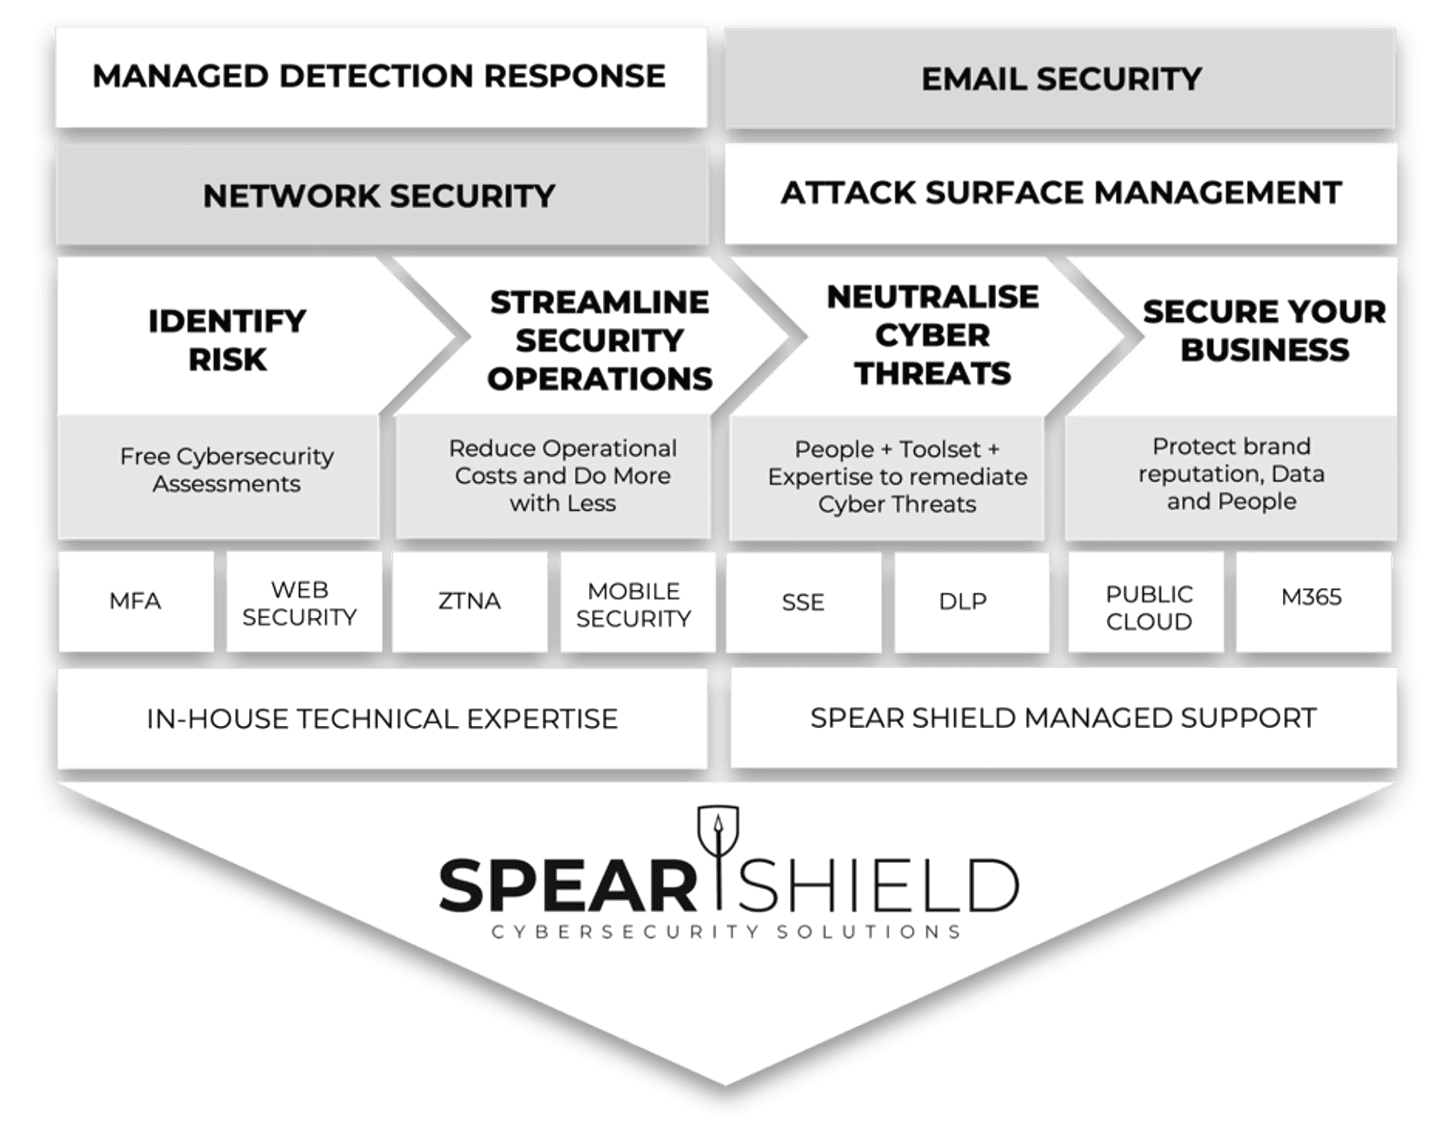 Spear Shield's portfolio of cybersecurity solutions and services